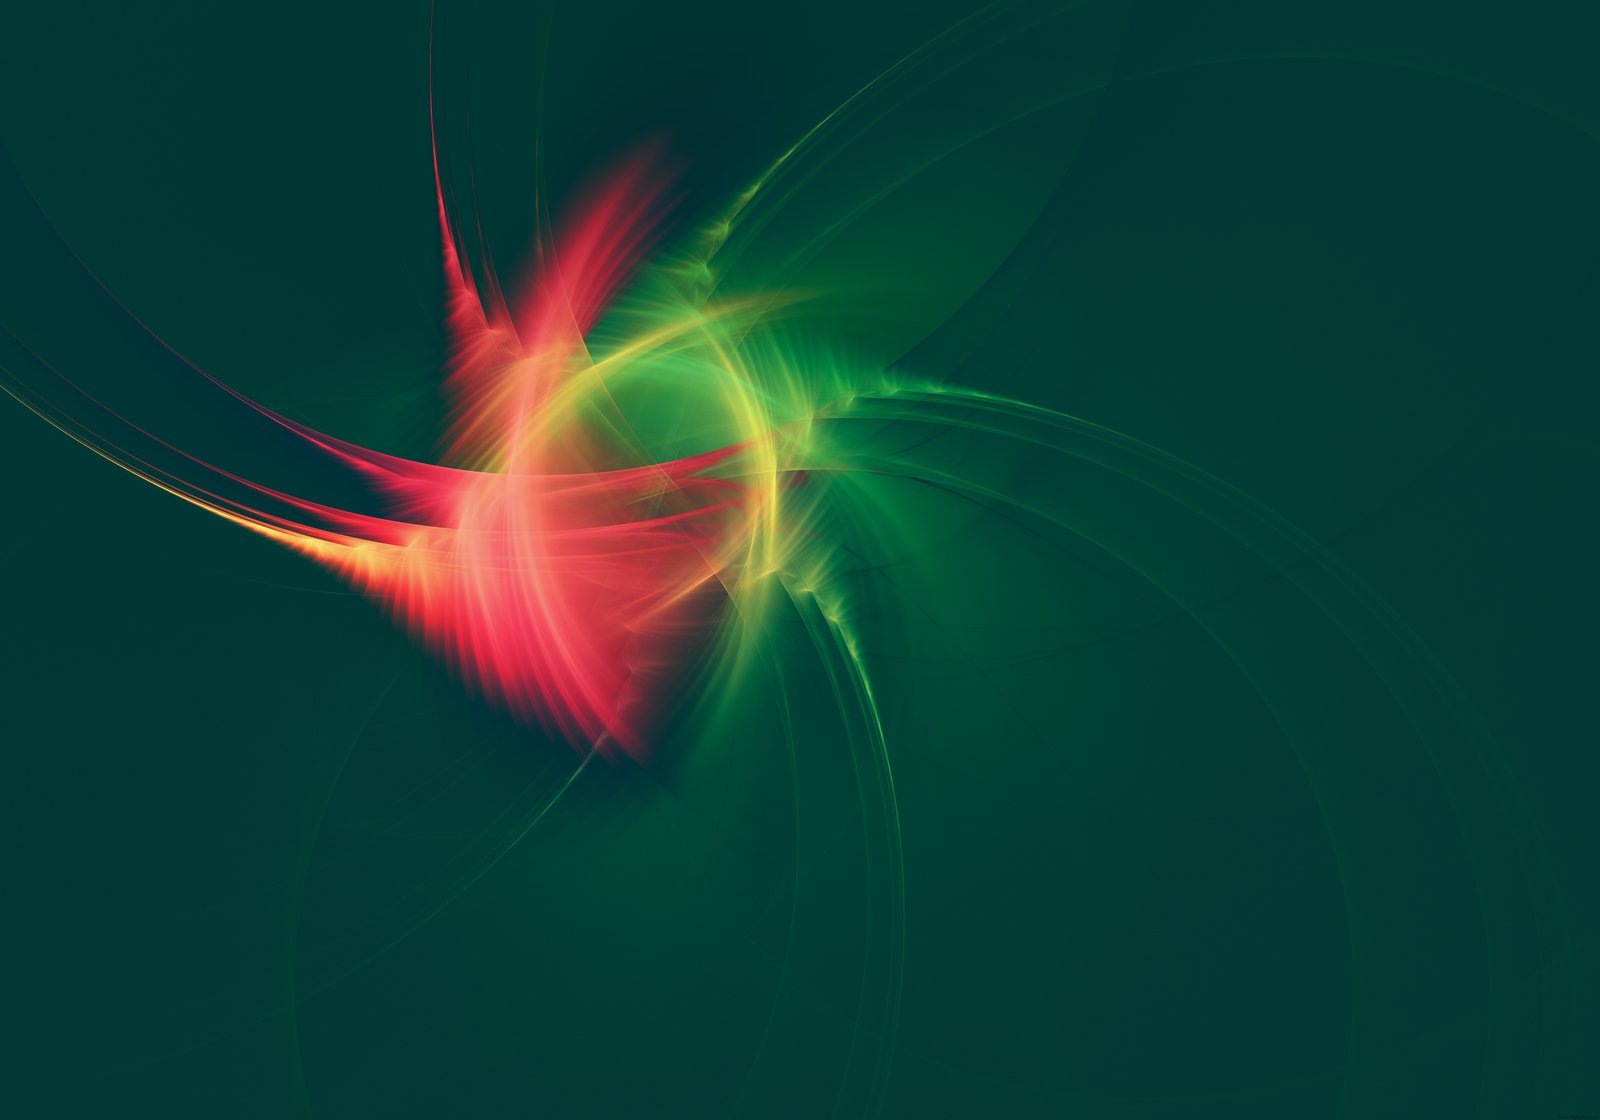 Abstract green light background - PSDgraphics